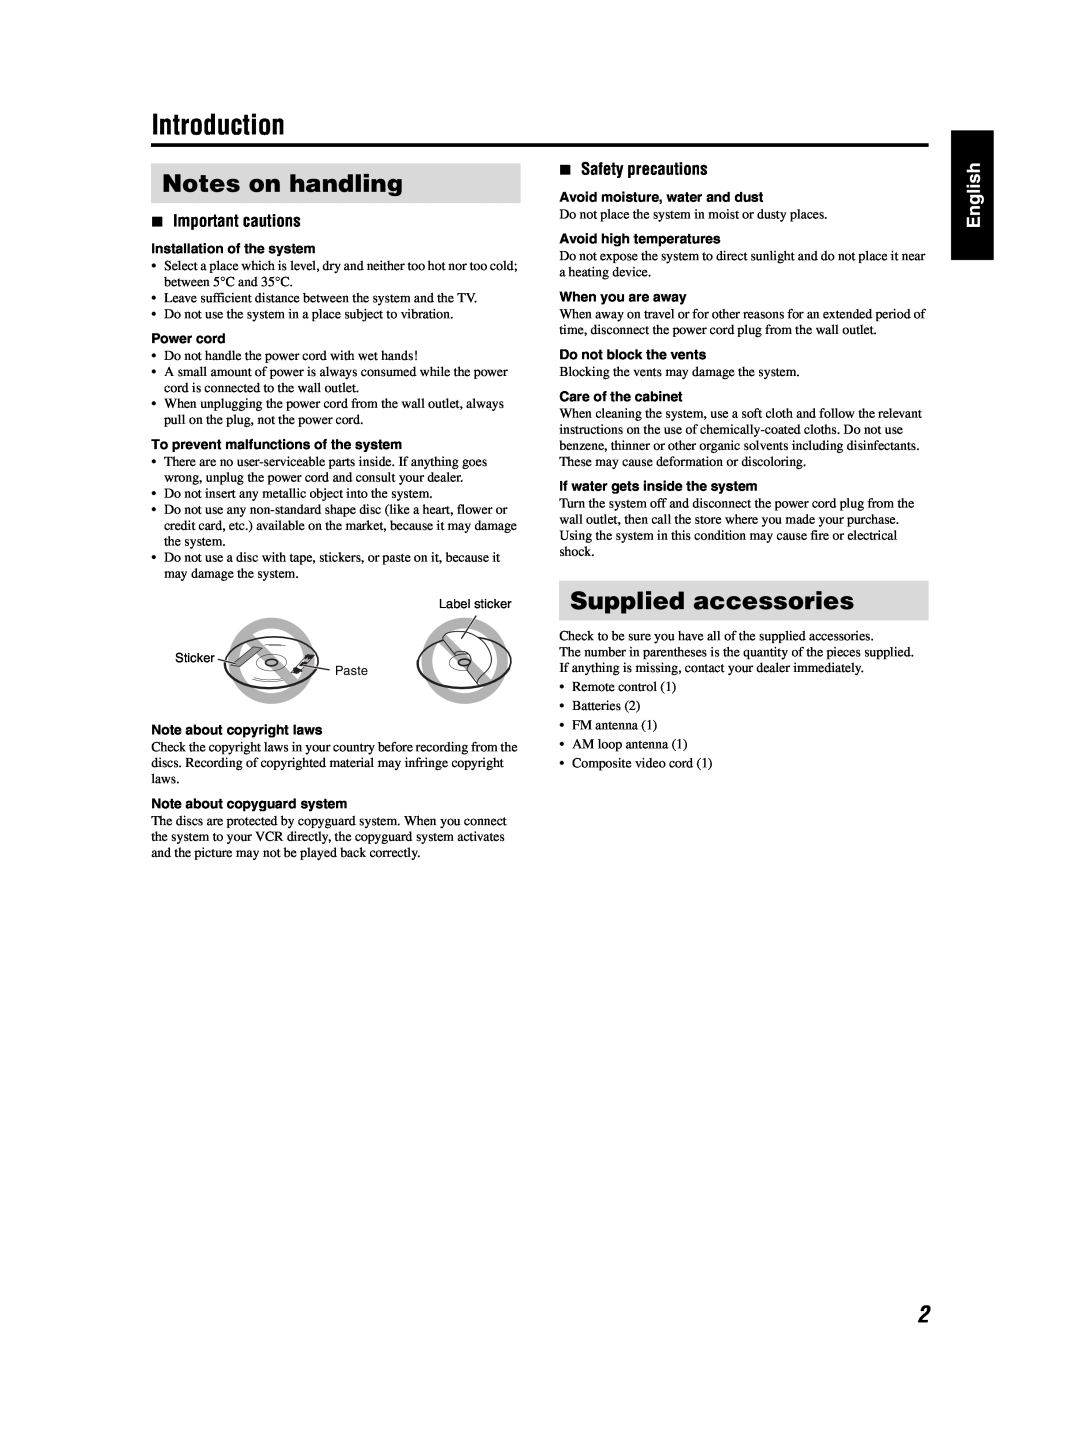 JVC TH-S3 TH-S2 manual Introduction, Notes on handling, Supplied accessories, 7Important cautions, 7Safety precautions 